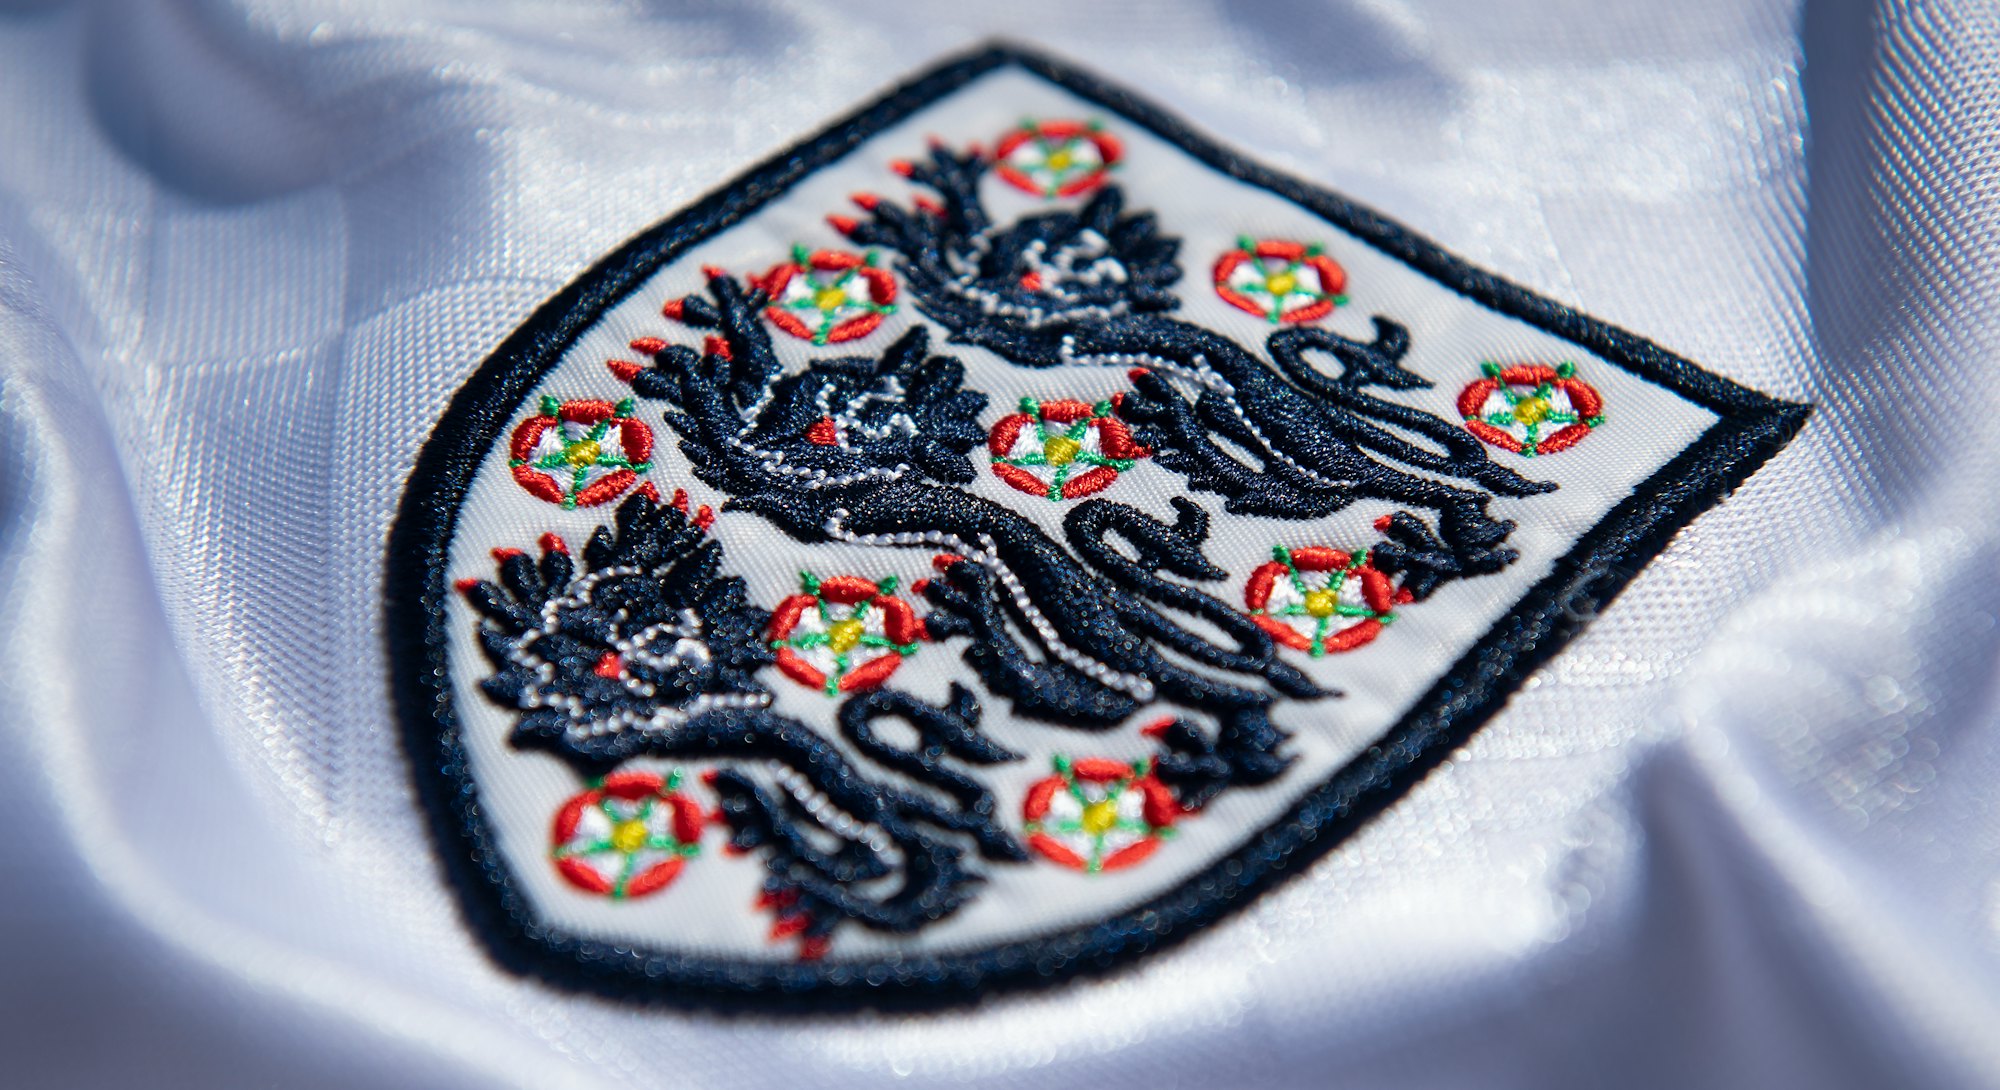 The three lions England crest on the England shirt in  2020